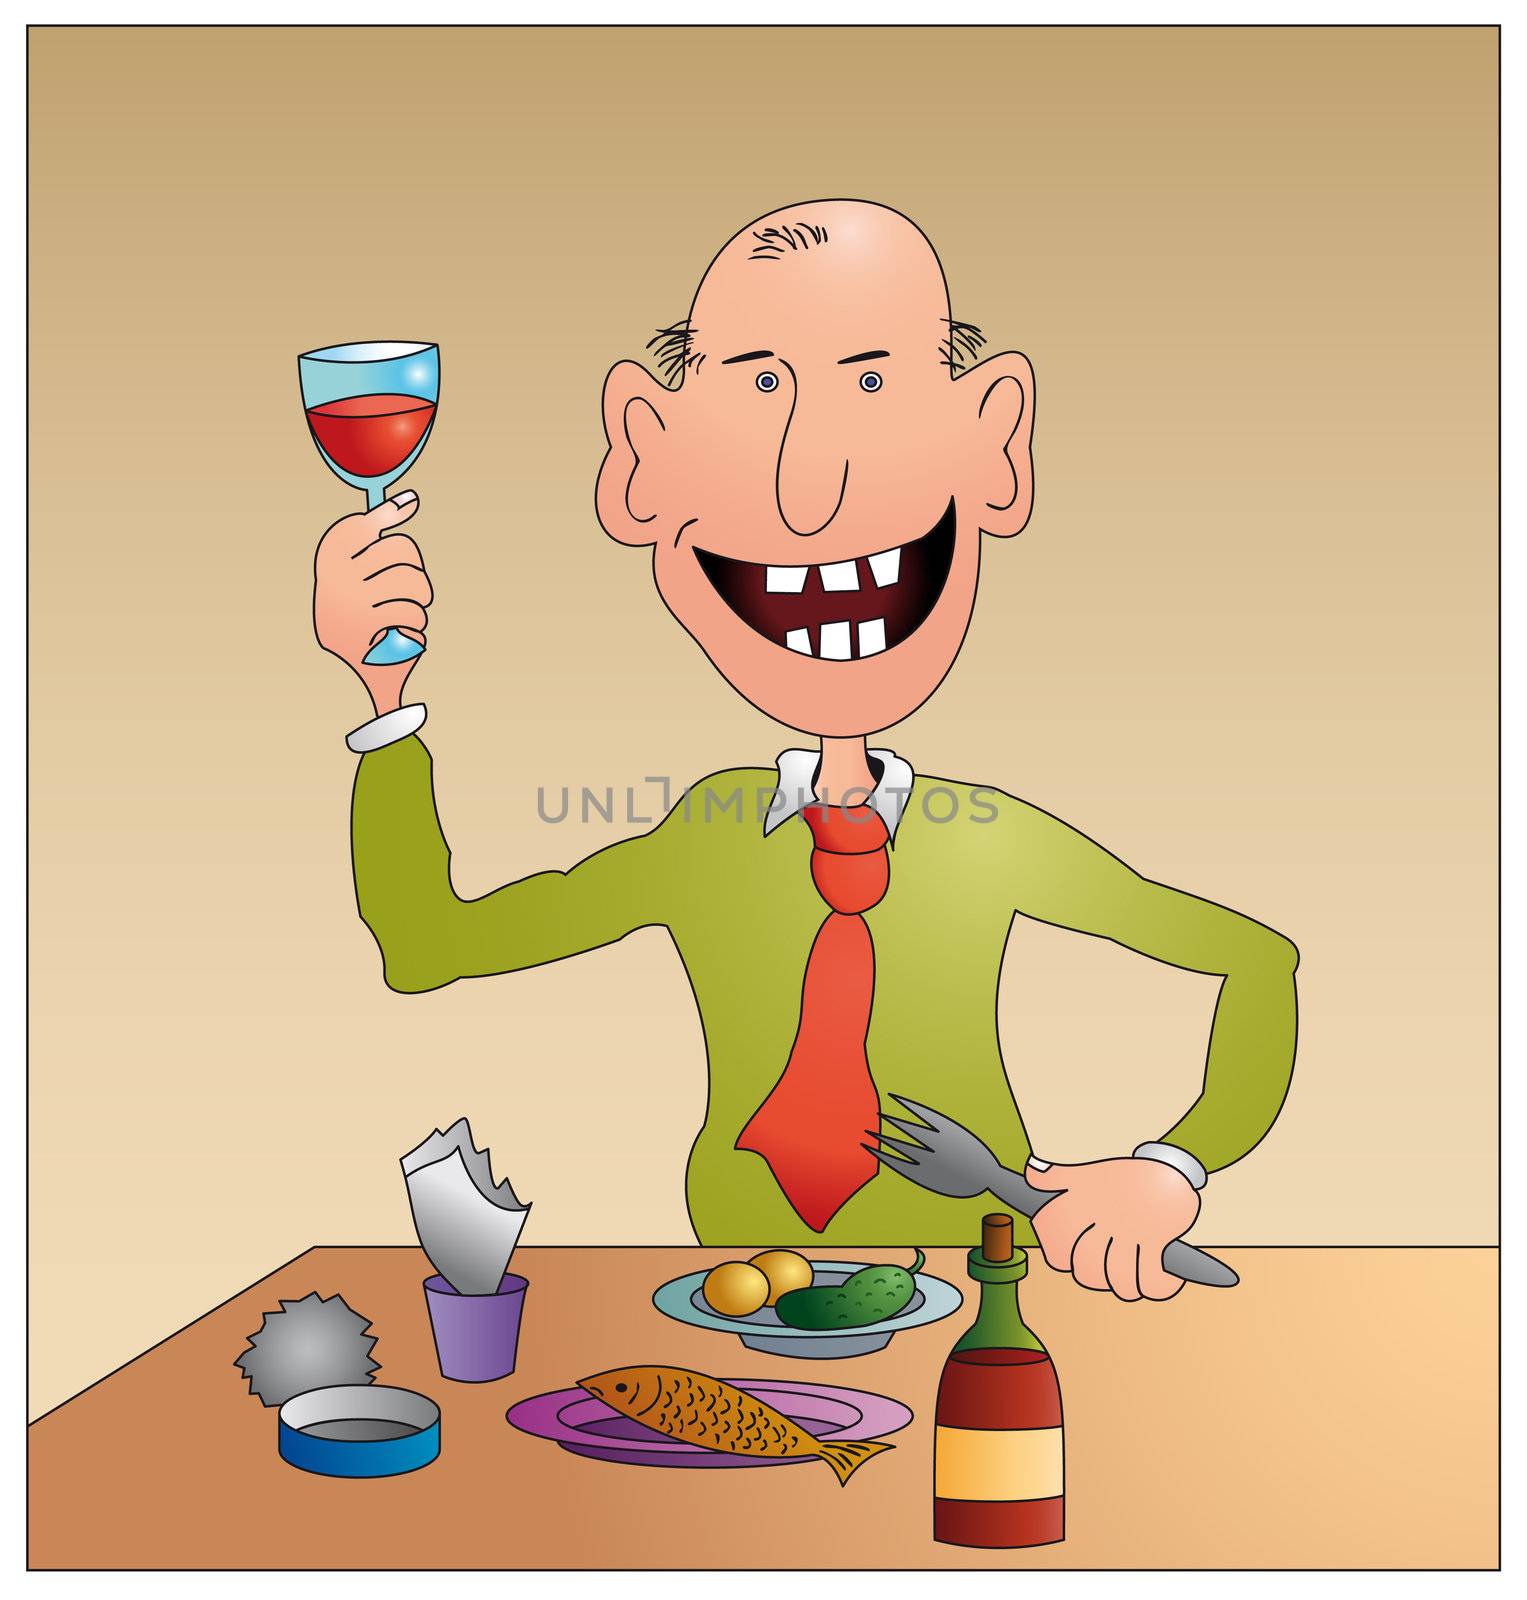 Cheerful bald man speaks a toast to your health :)